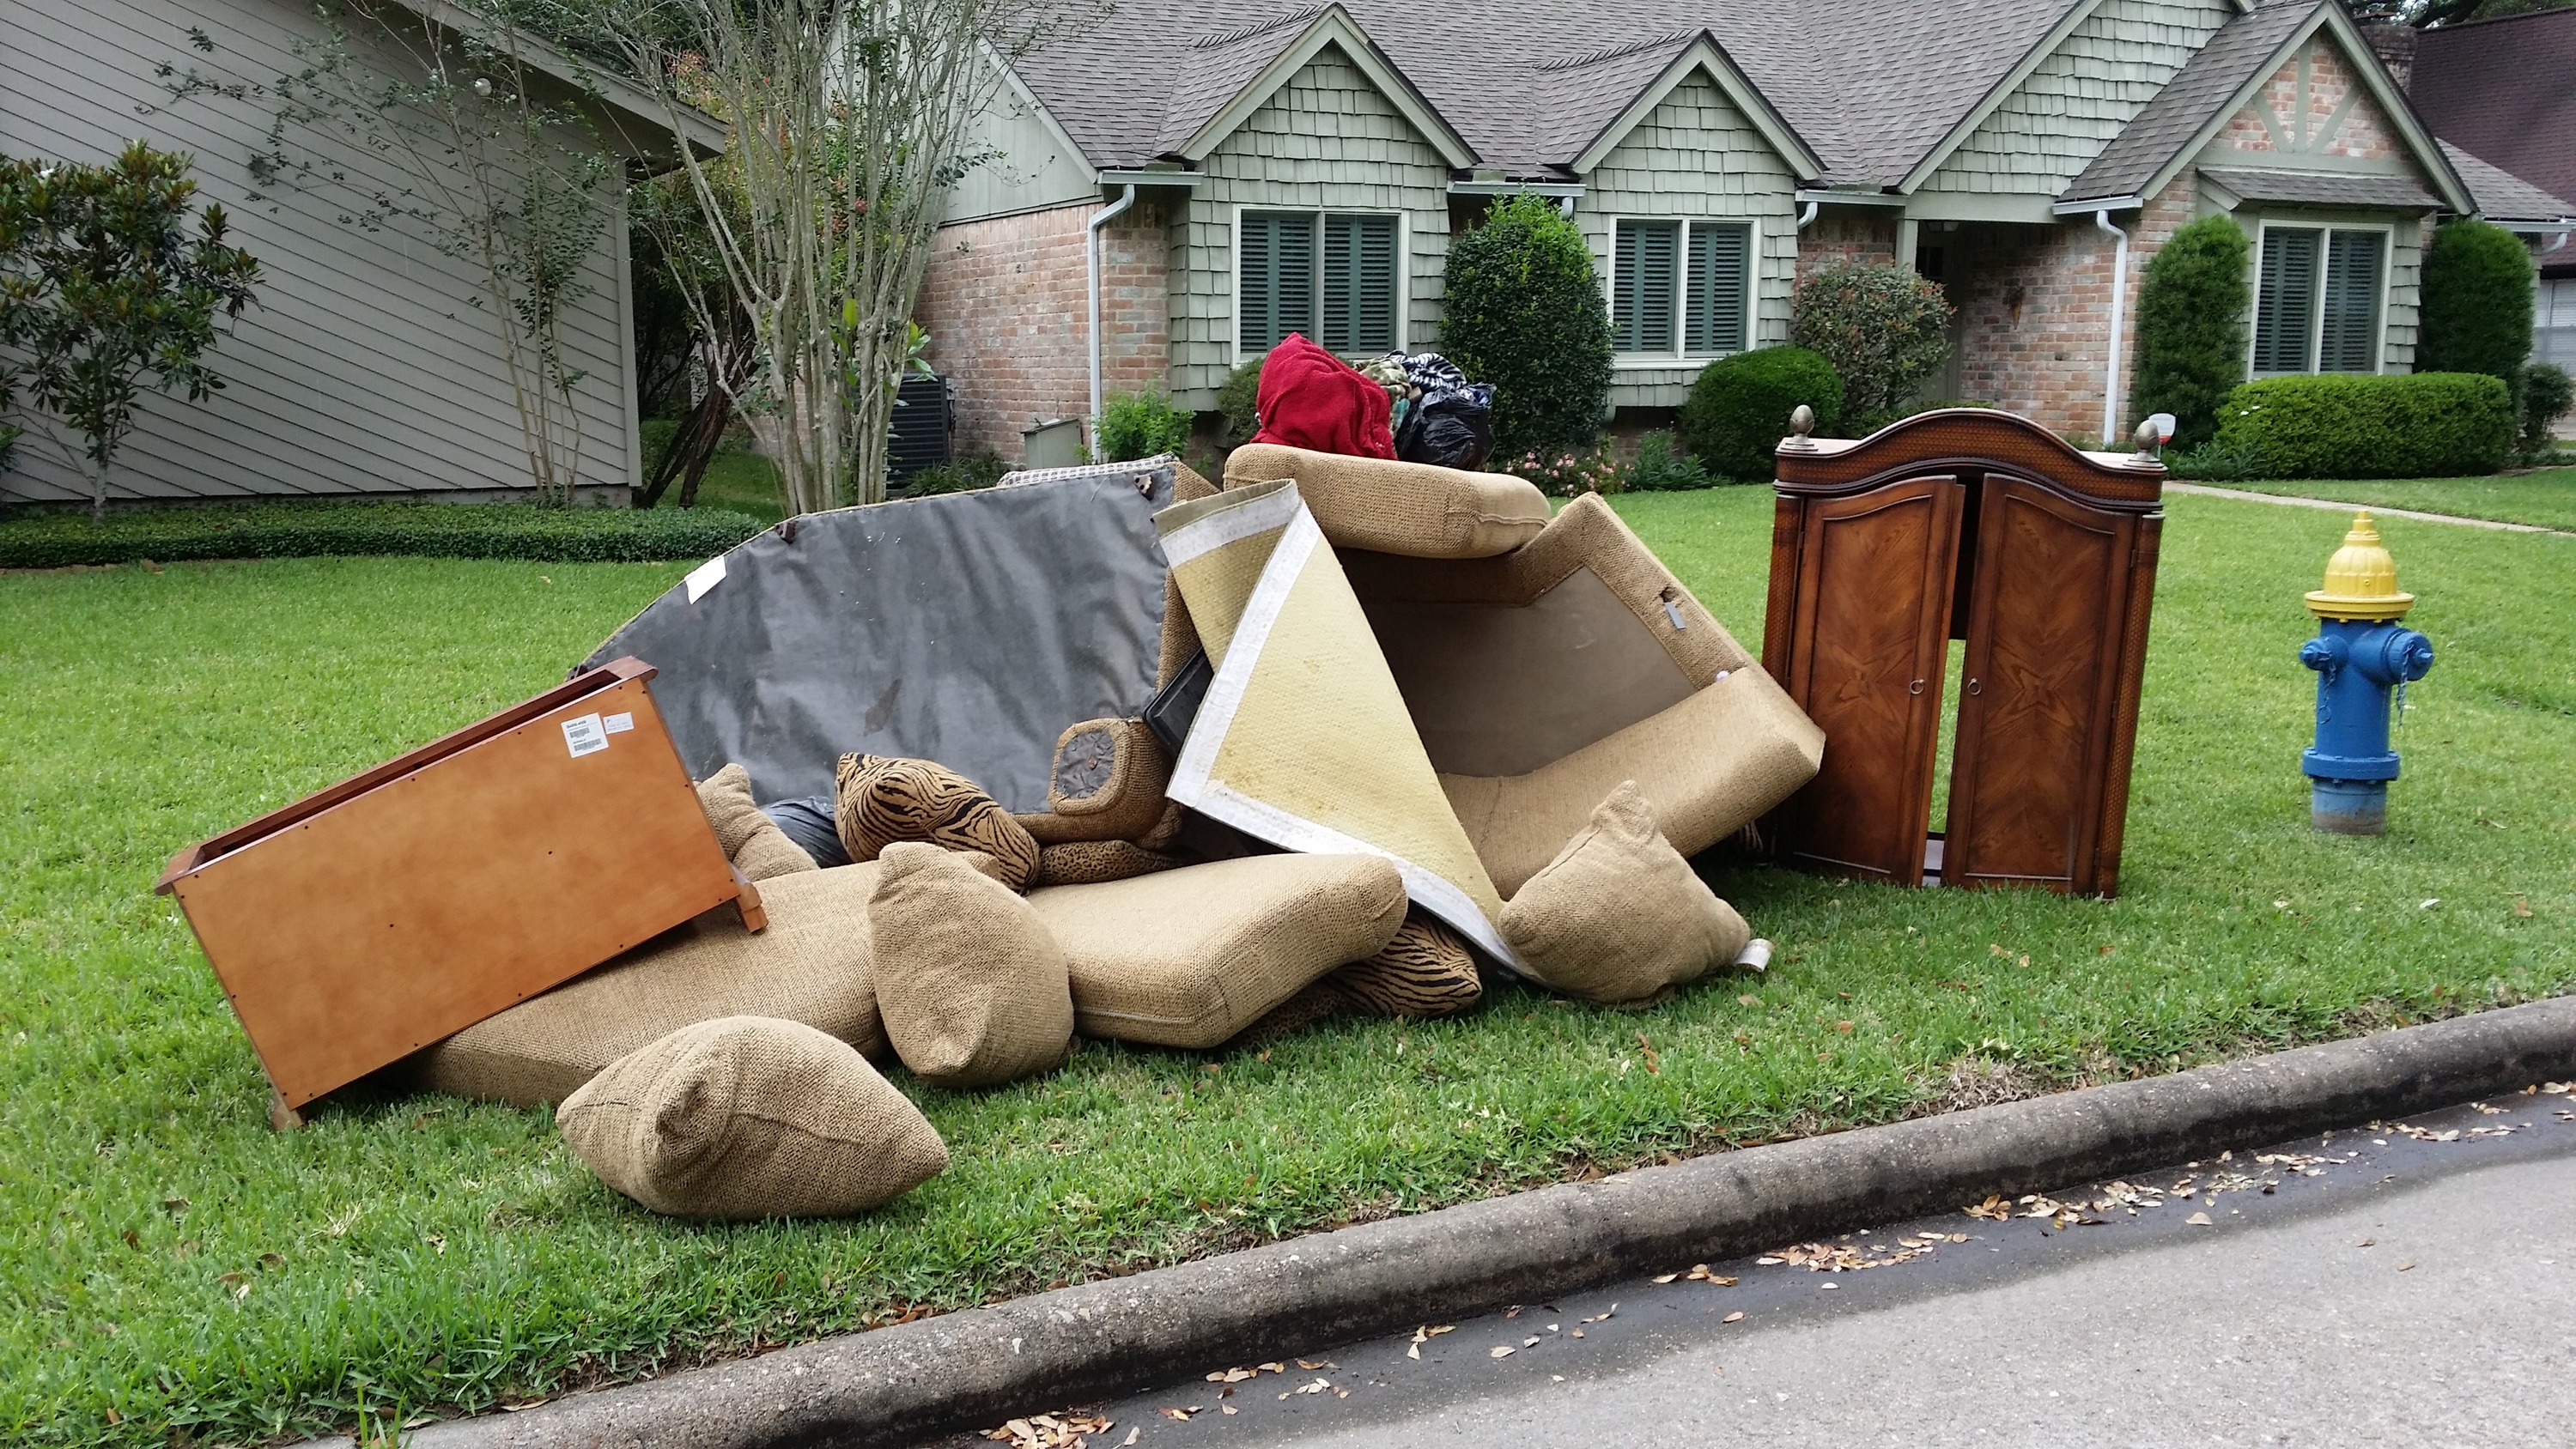 Dumpsters & Junk Removal Houston | Snap Junk Removal | 281-610-6682